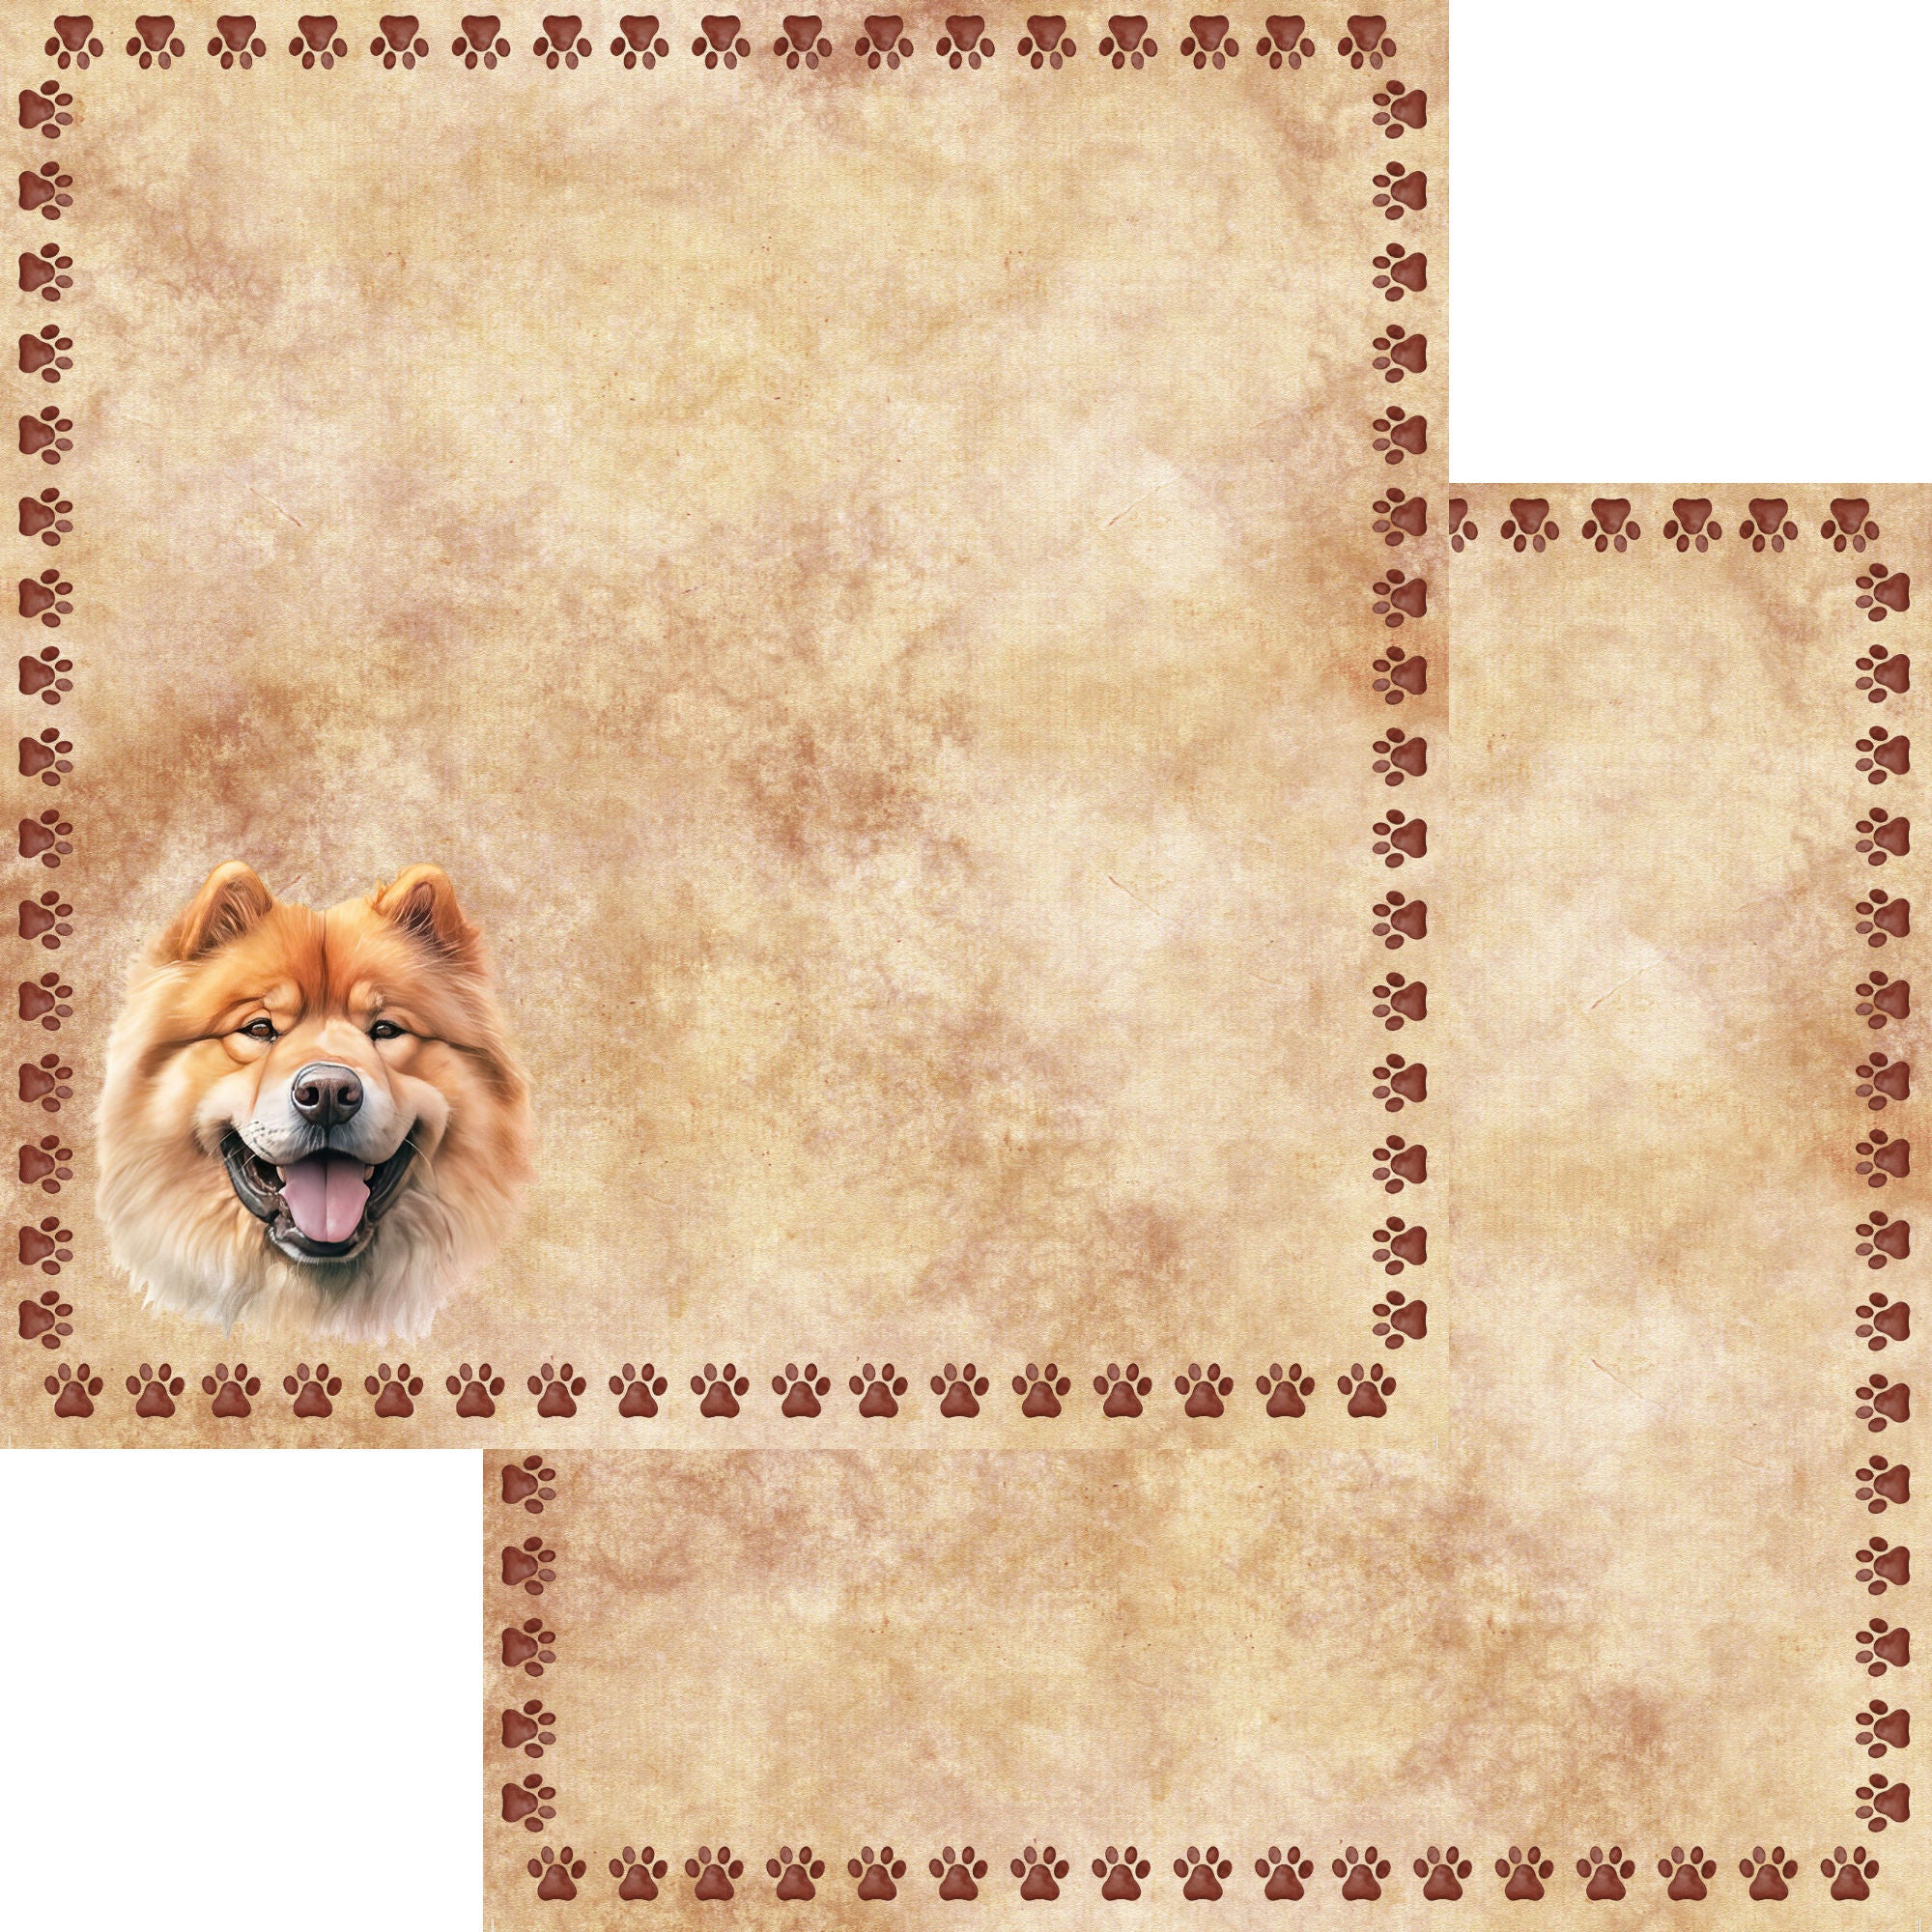 Dog Breeds Collection Chow Chow 12 x 12 Double-Sided Scrapbook Paper by SSC Designs